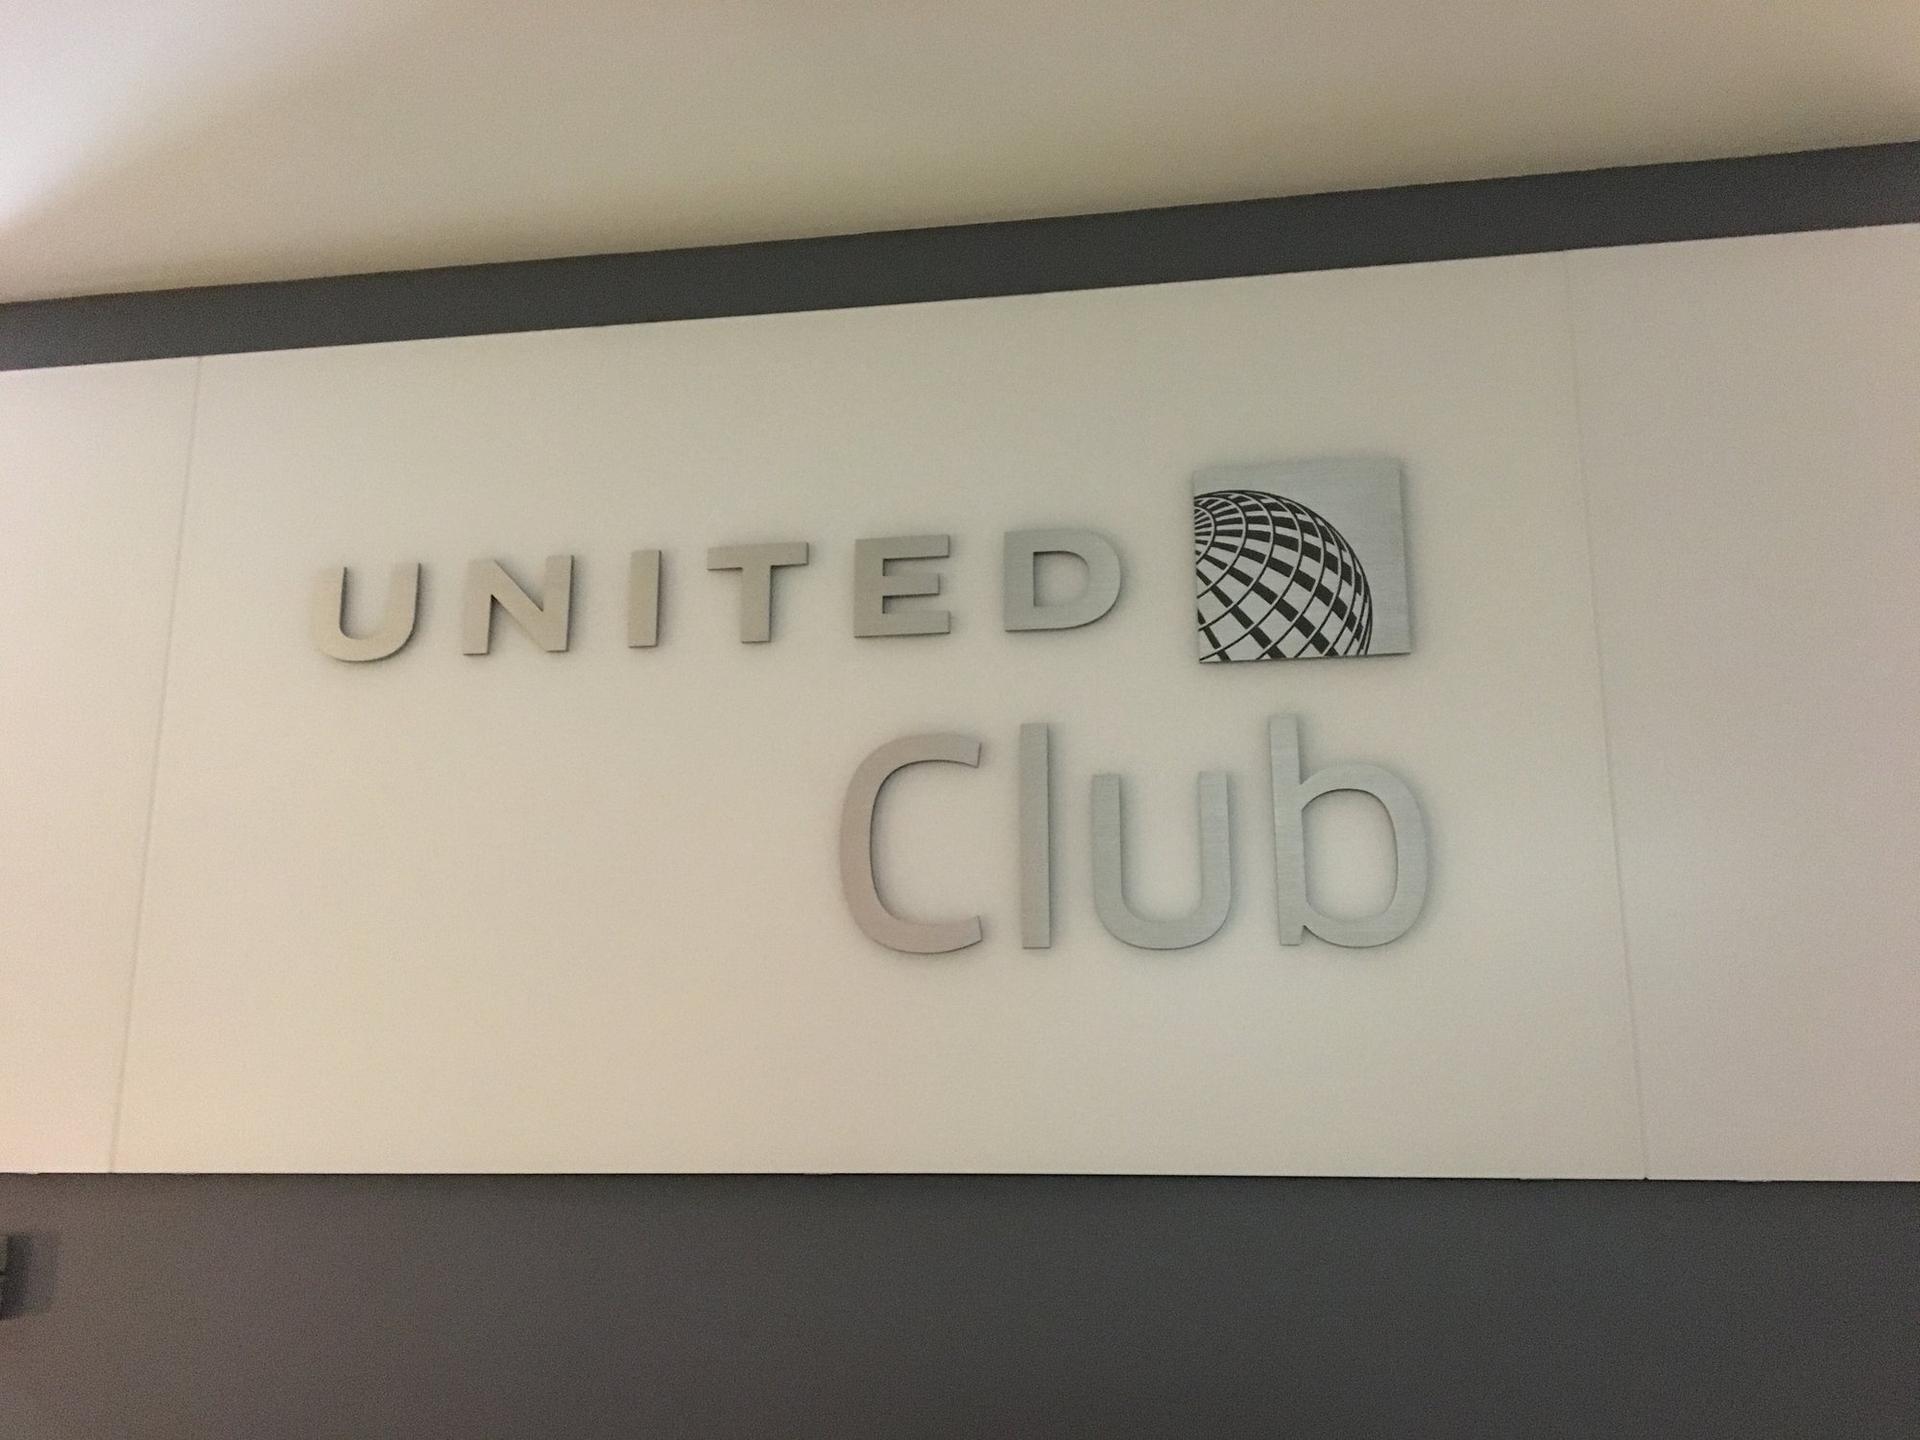 United Airlines United Club image 12 of 12